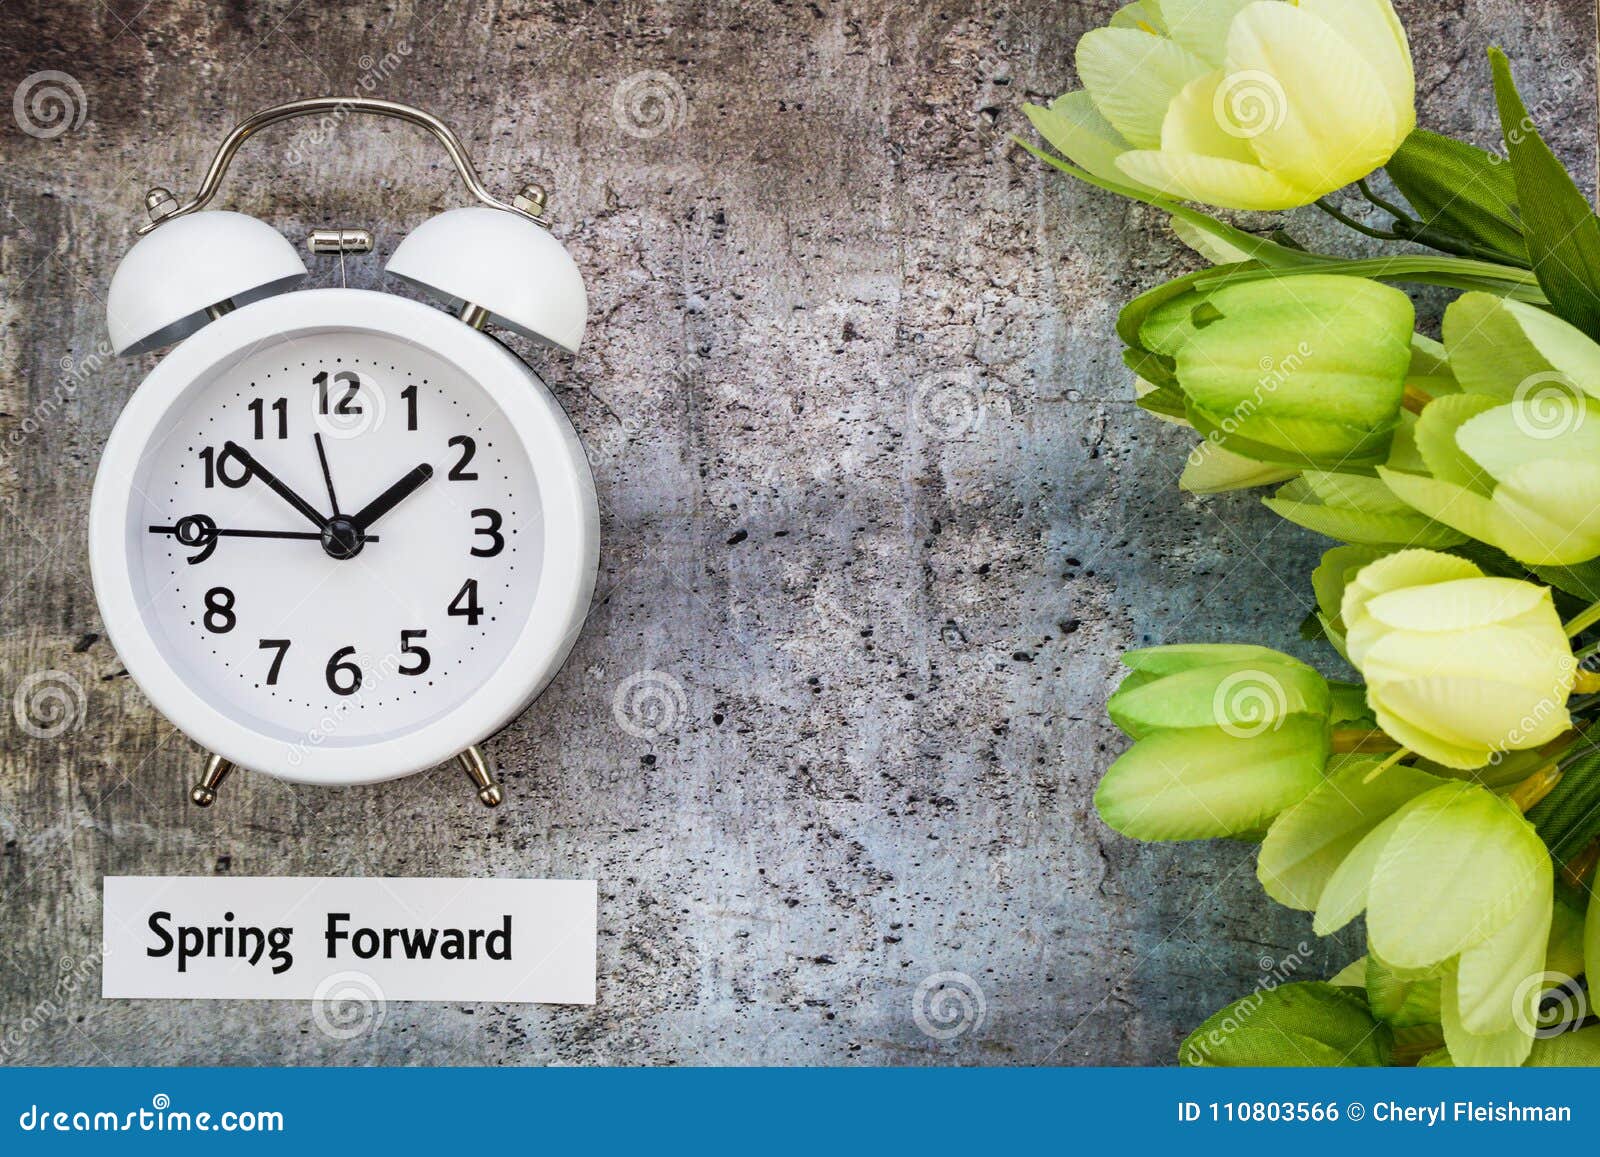 daylight savings time spring forward concept top down view with white clock and green tulips